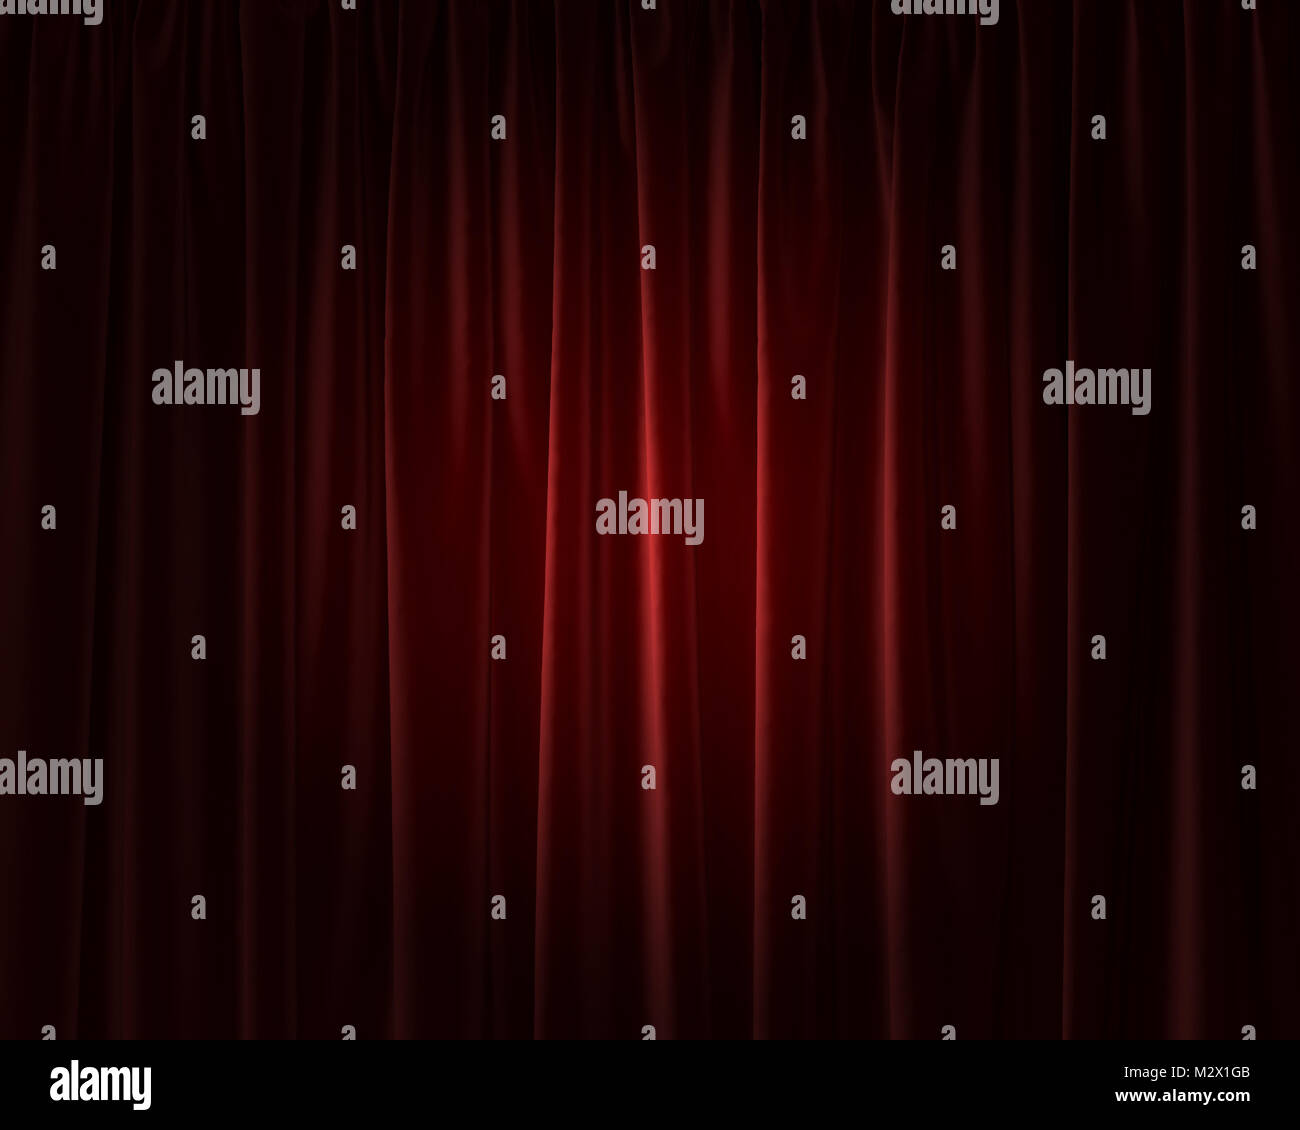 Red theatre entertainment event curtain. 3D Rendering Stock Photo